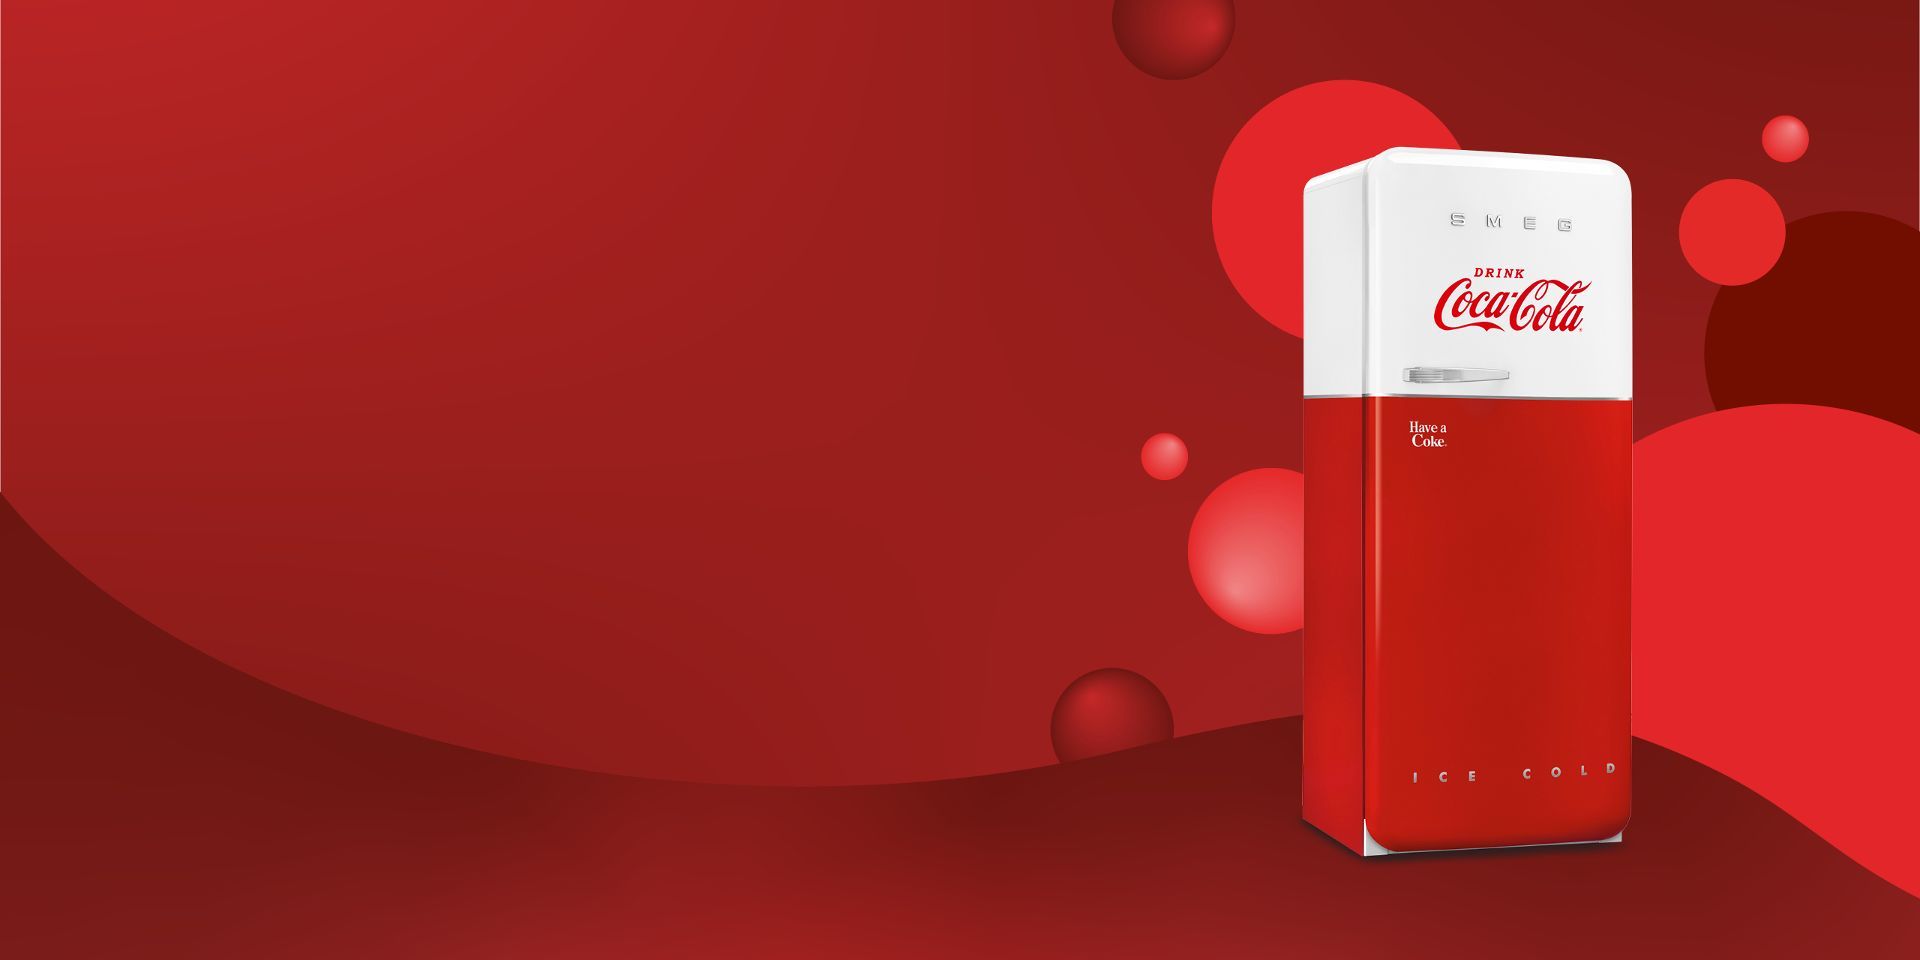 Smeg & Coca-Cola collaboration, and 'iconic' design with red and white